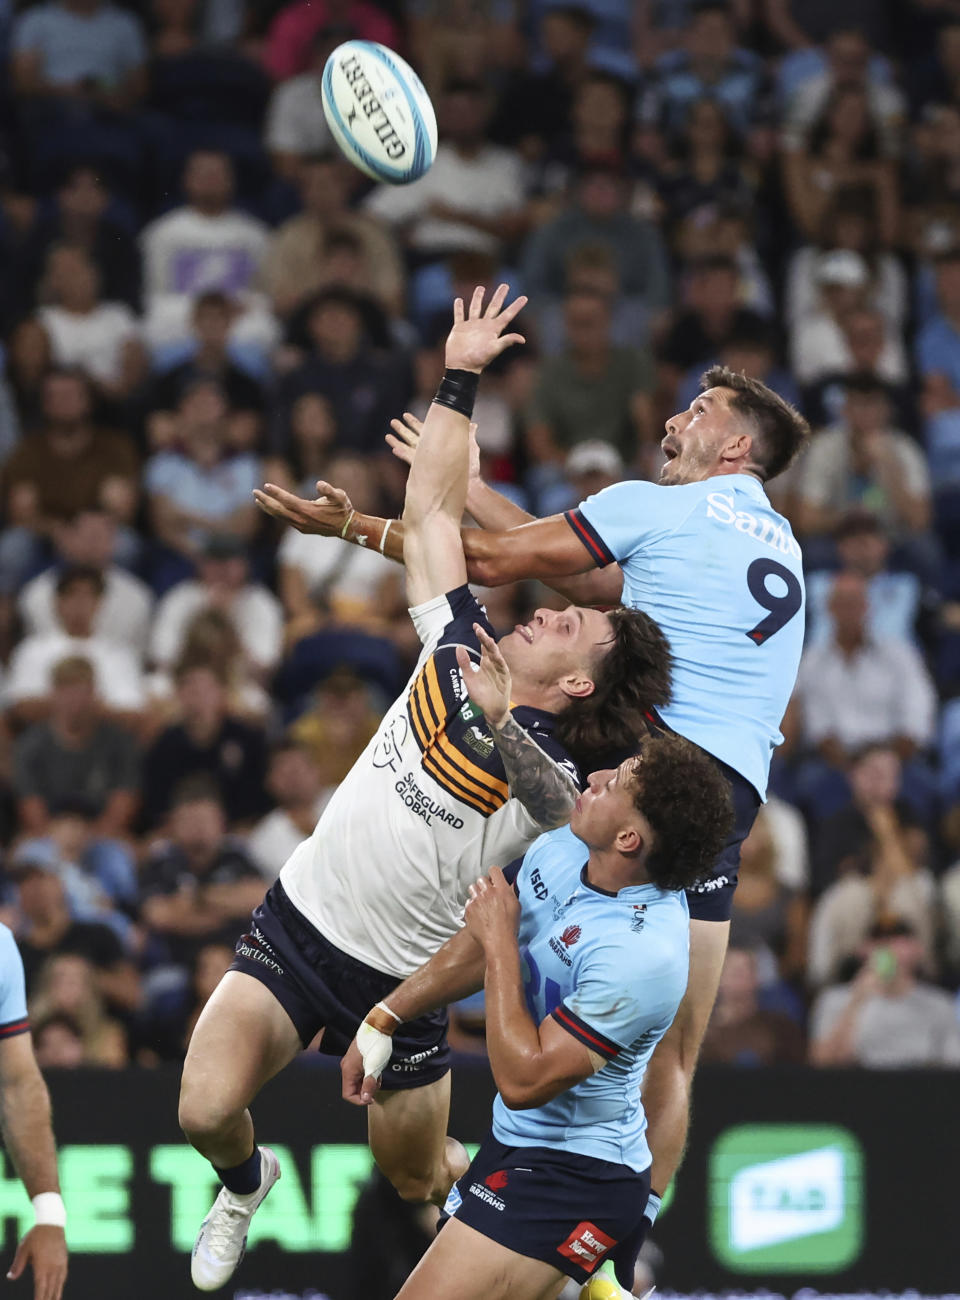 Jake Gordon, right, from the New South Wales Waratahs jumps for the ball with Corey Toole, left, from the ACT Brumbies during their Super Rugby Pacific Round 1 match at Allianz Stadium in Sydney, Australia Friday, Feb. 24, 2023. (David Gray/AAP Image via AP)